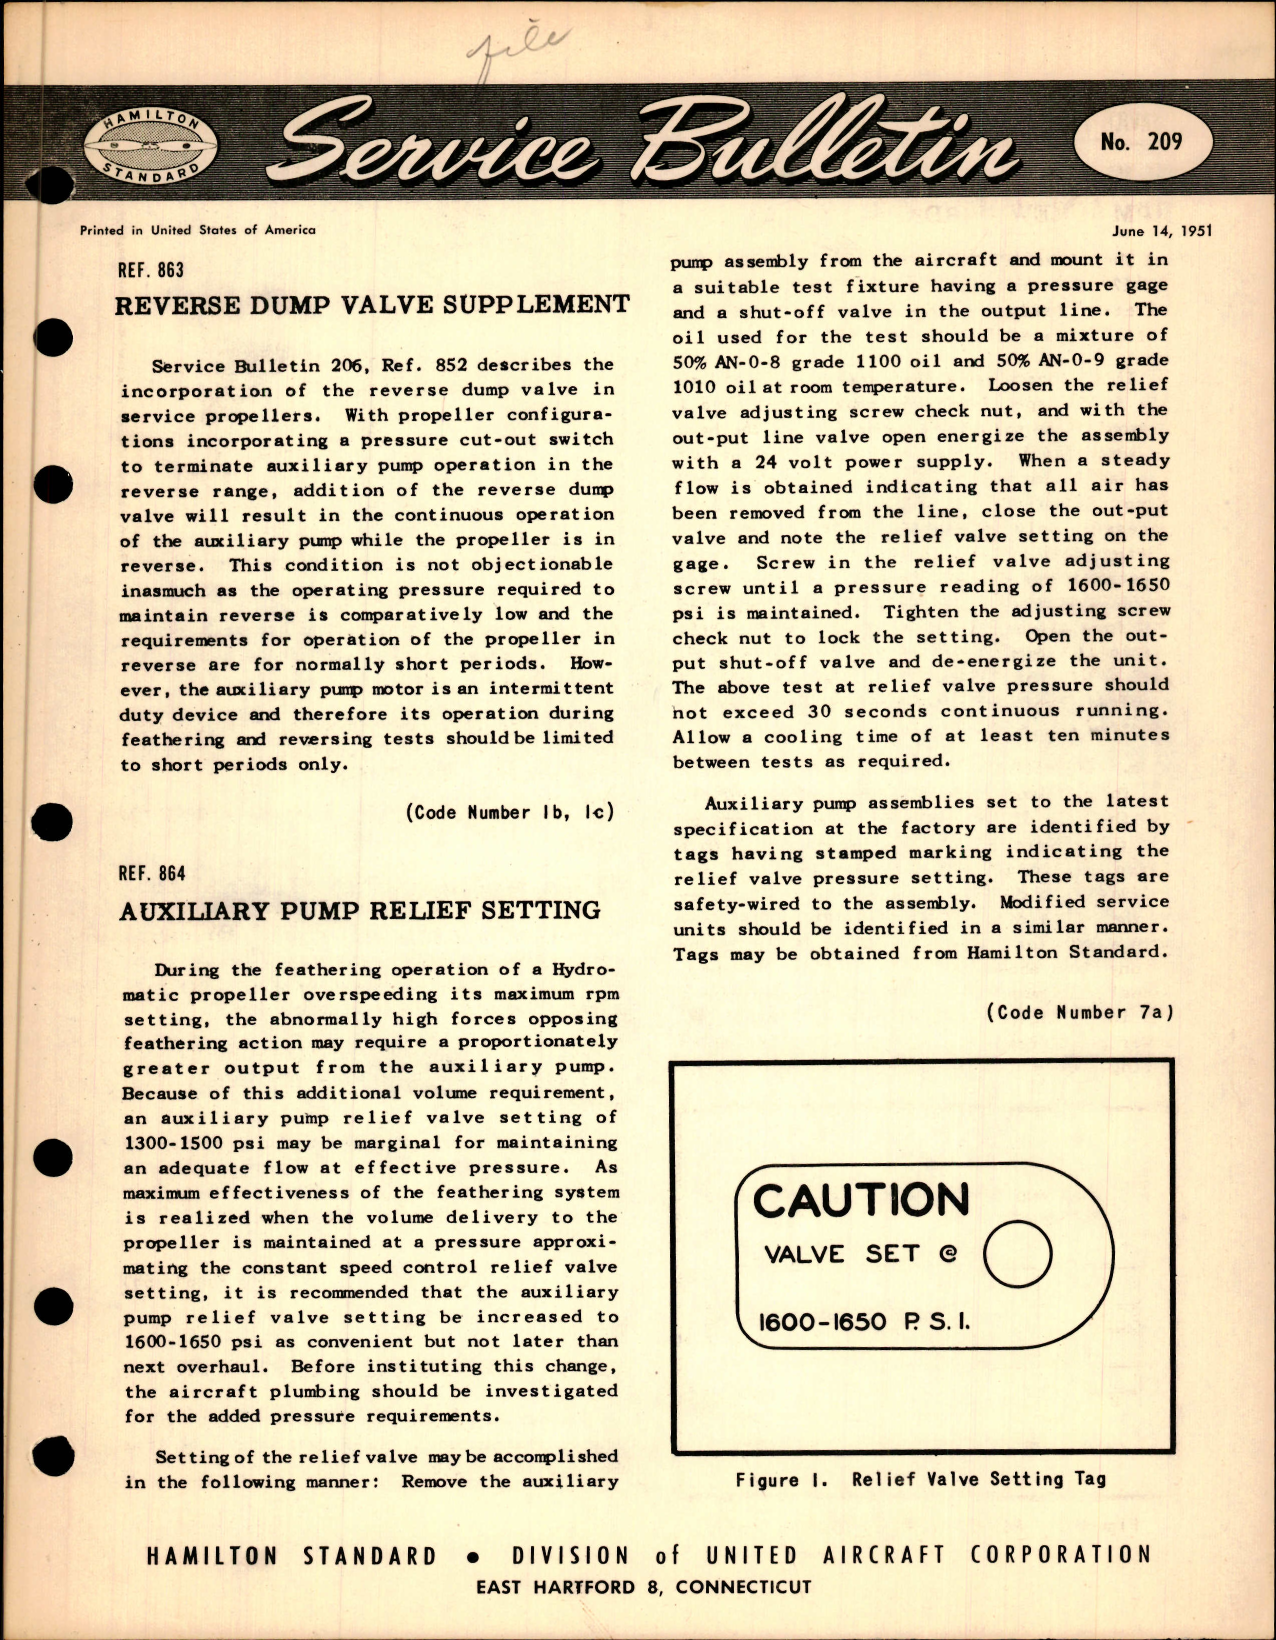 Sample page 1 from AirCorps Library document: Reverse Dump Valve Supplement, Ref 863